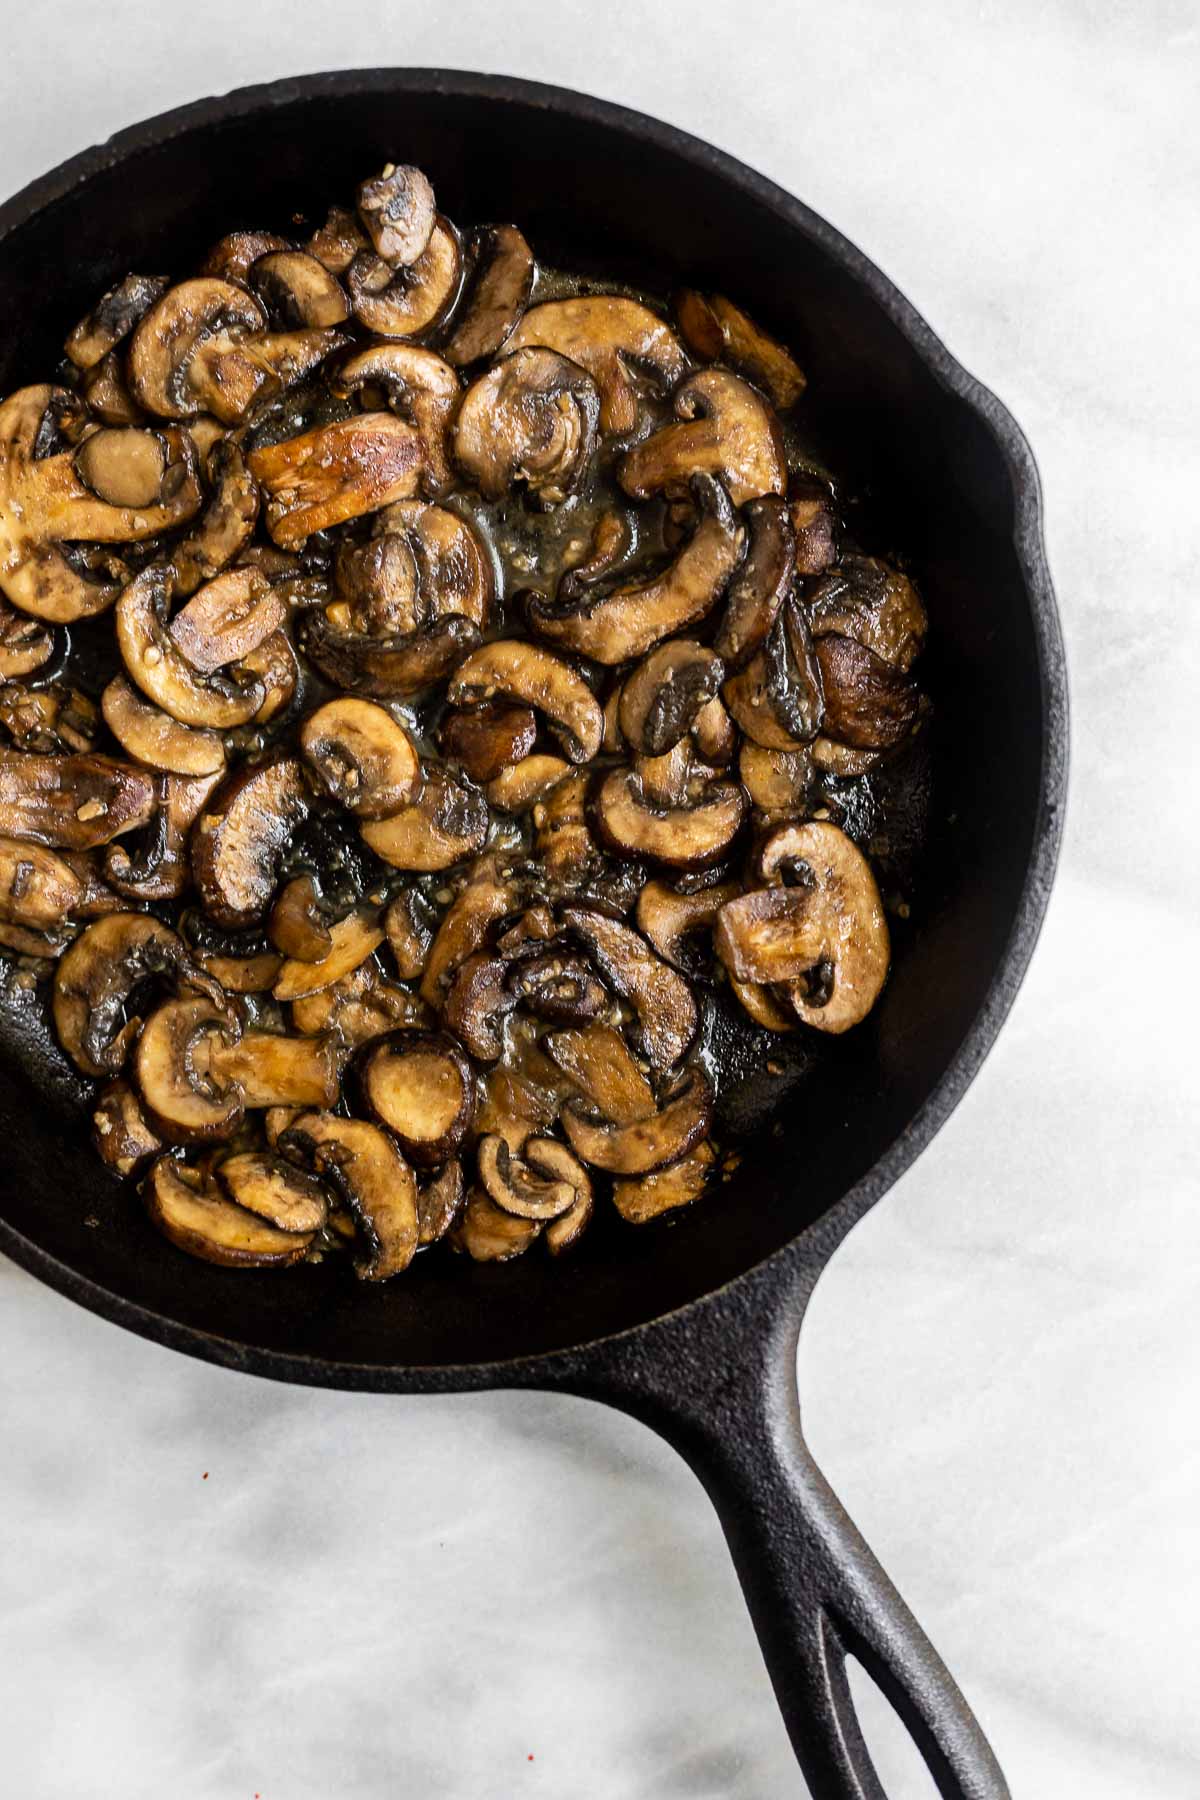 Mushrooms sauteed in a black pot with garlic.